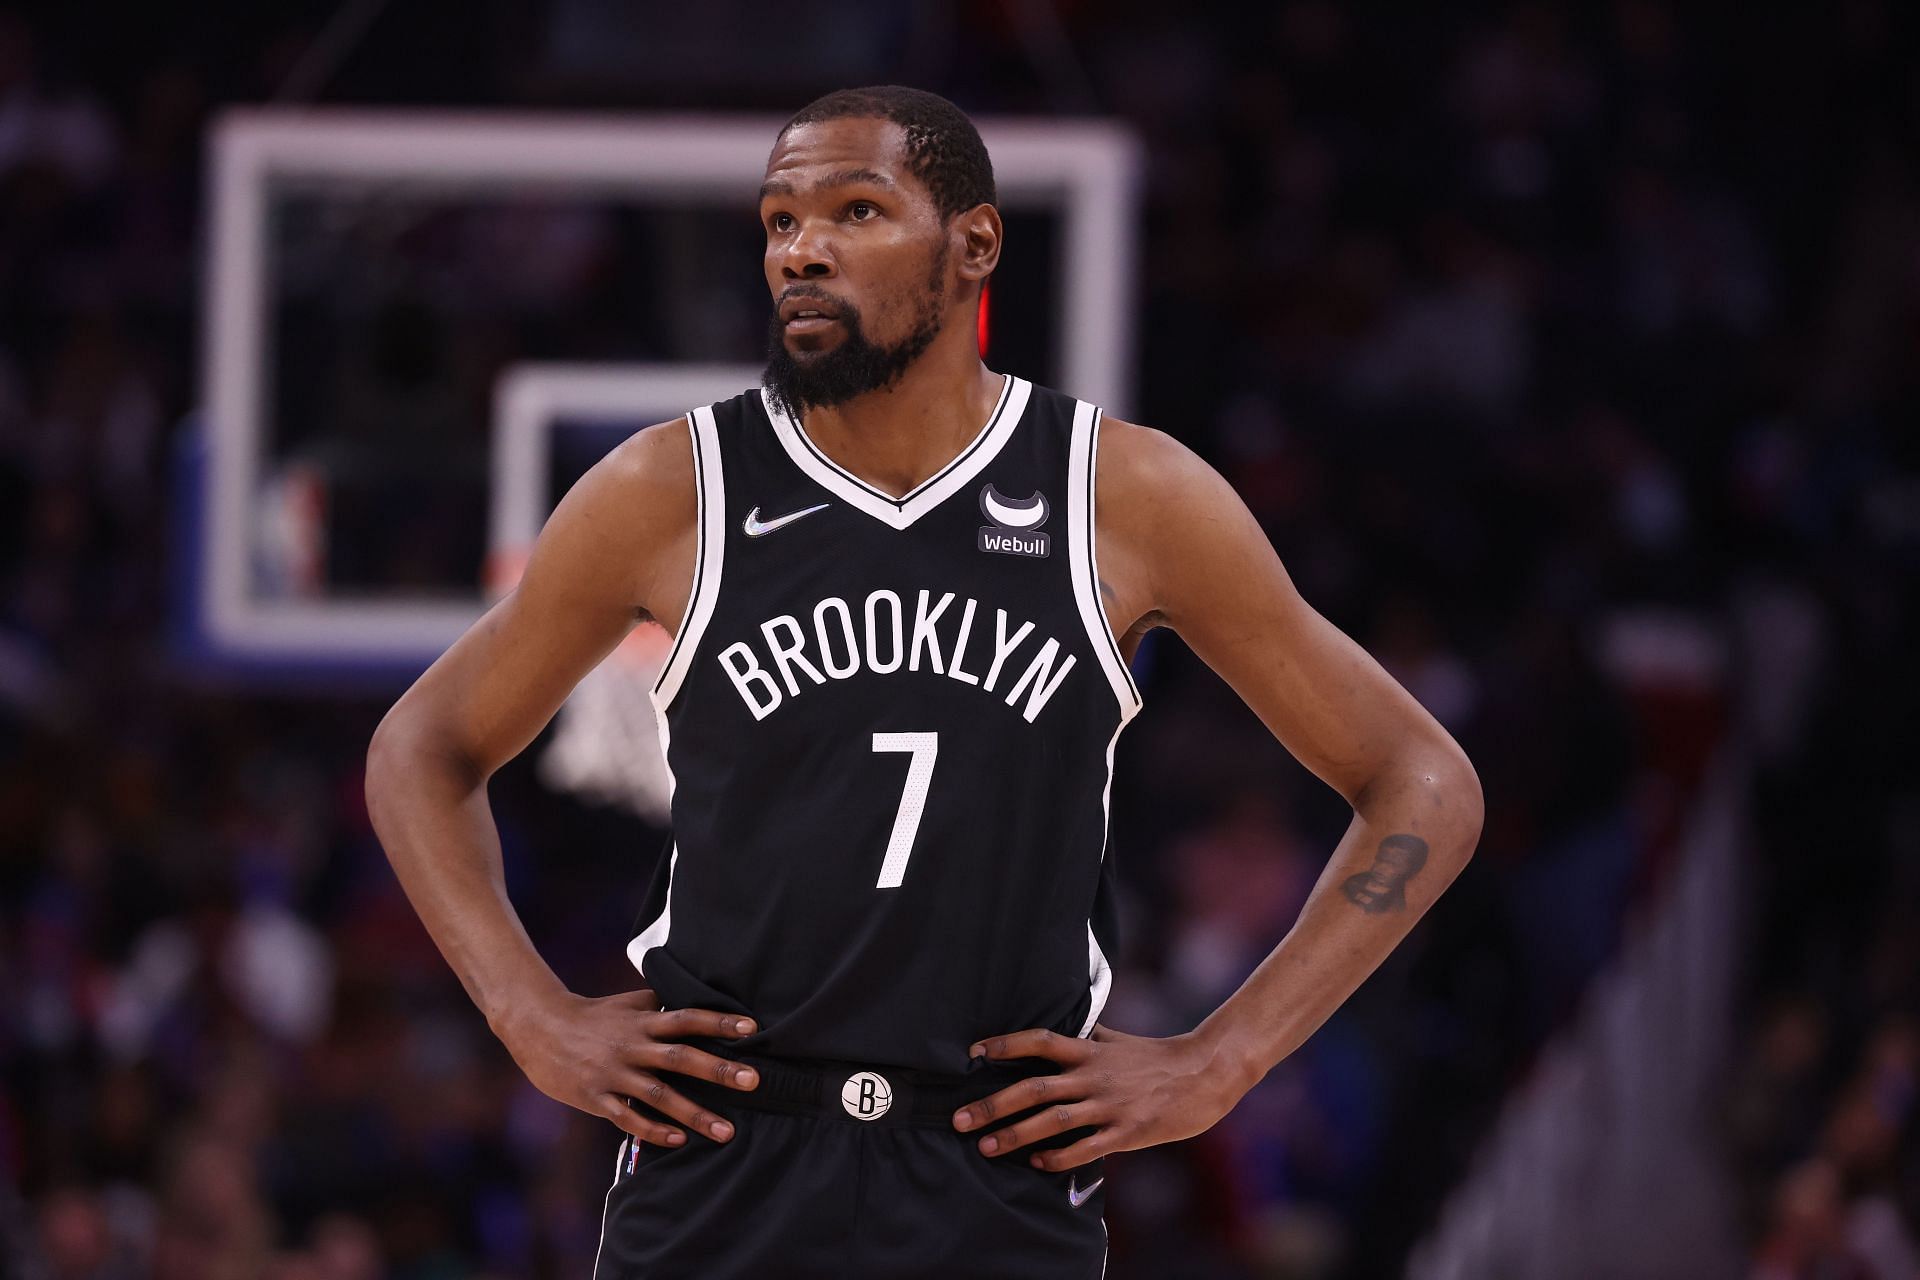 Kevin Durant of the Brooklyn Nets might win his second NBA MVP award this season.